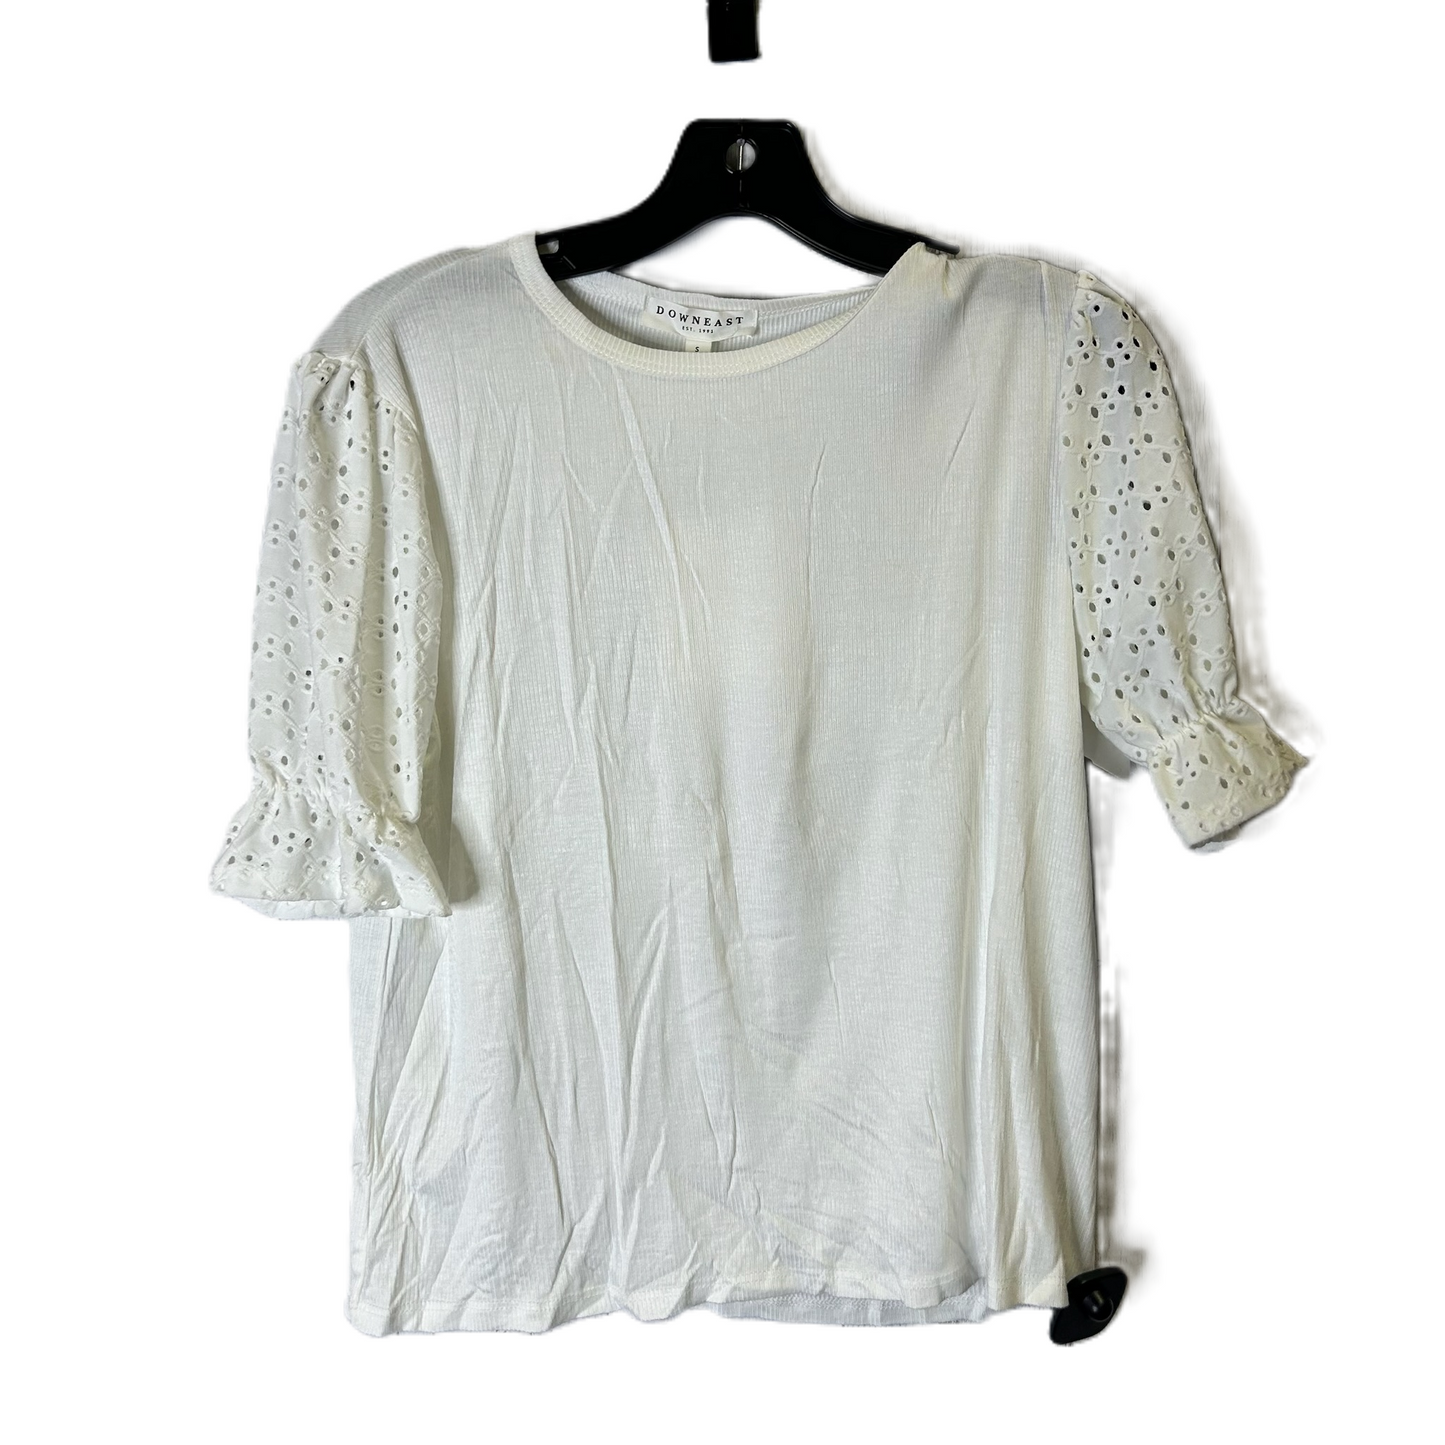 Cream Top Short Sleeve By Downeast, Size: S